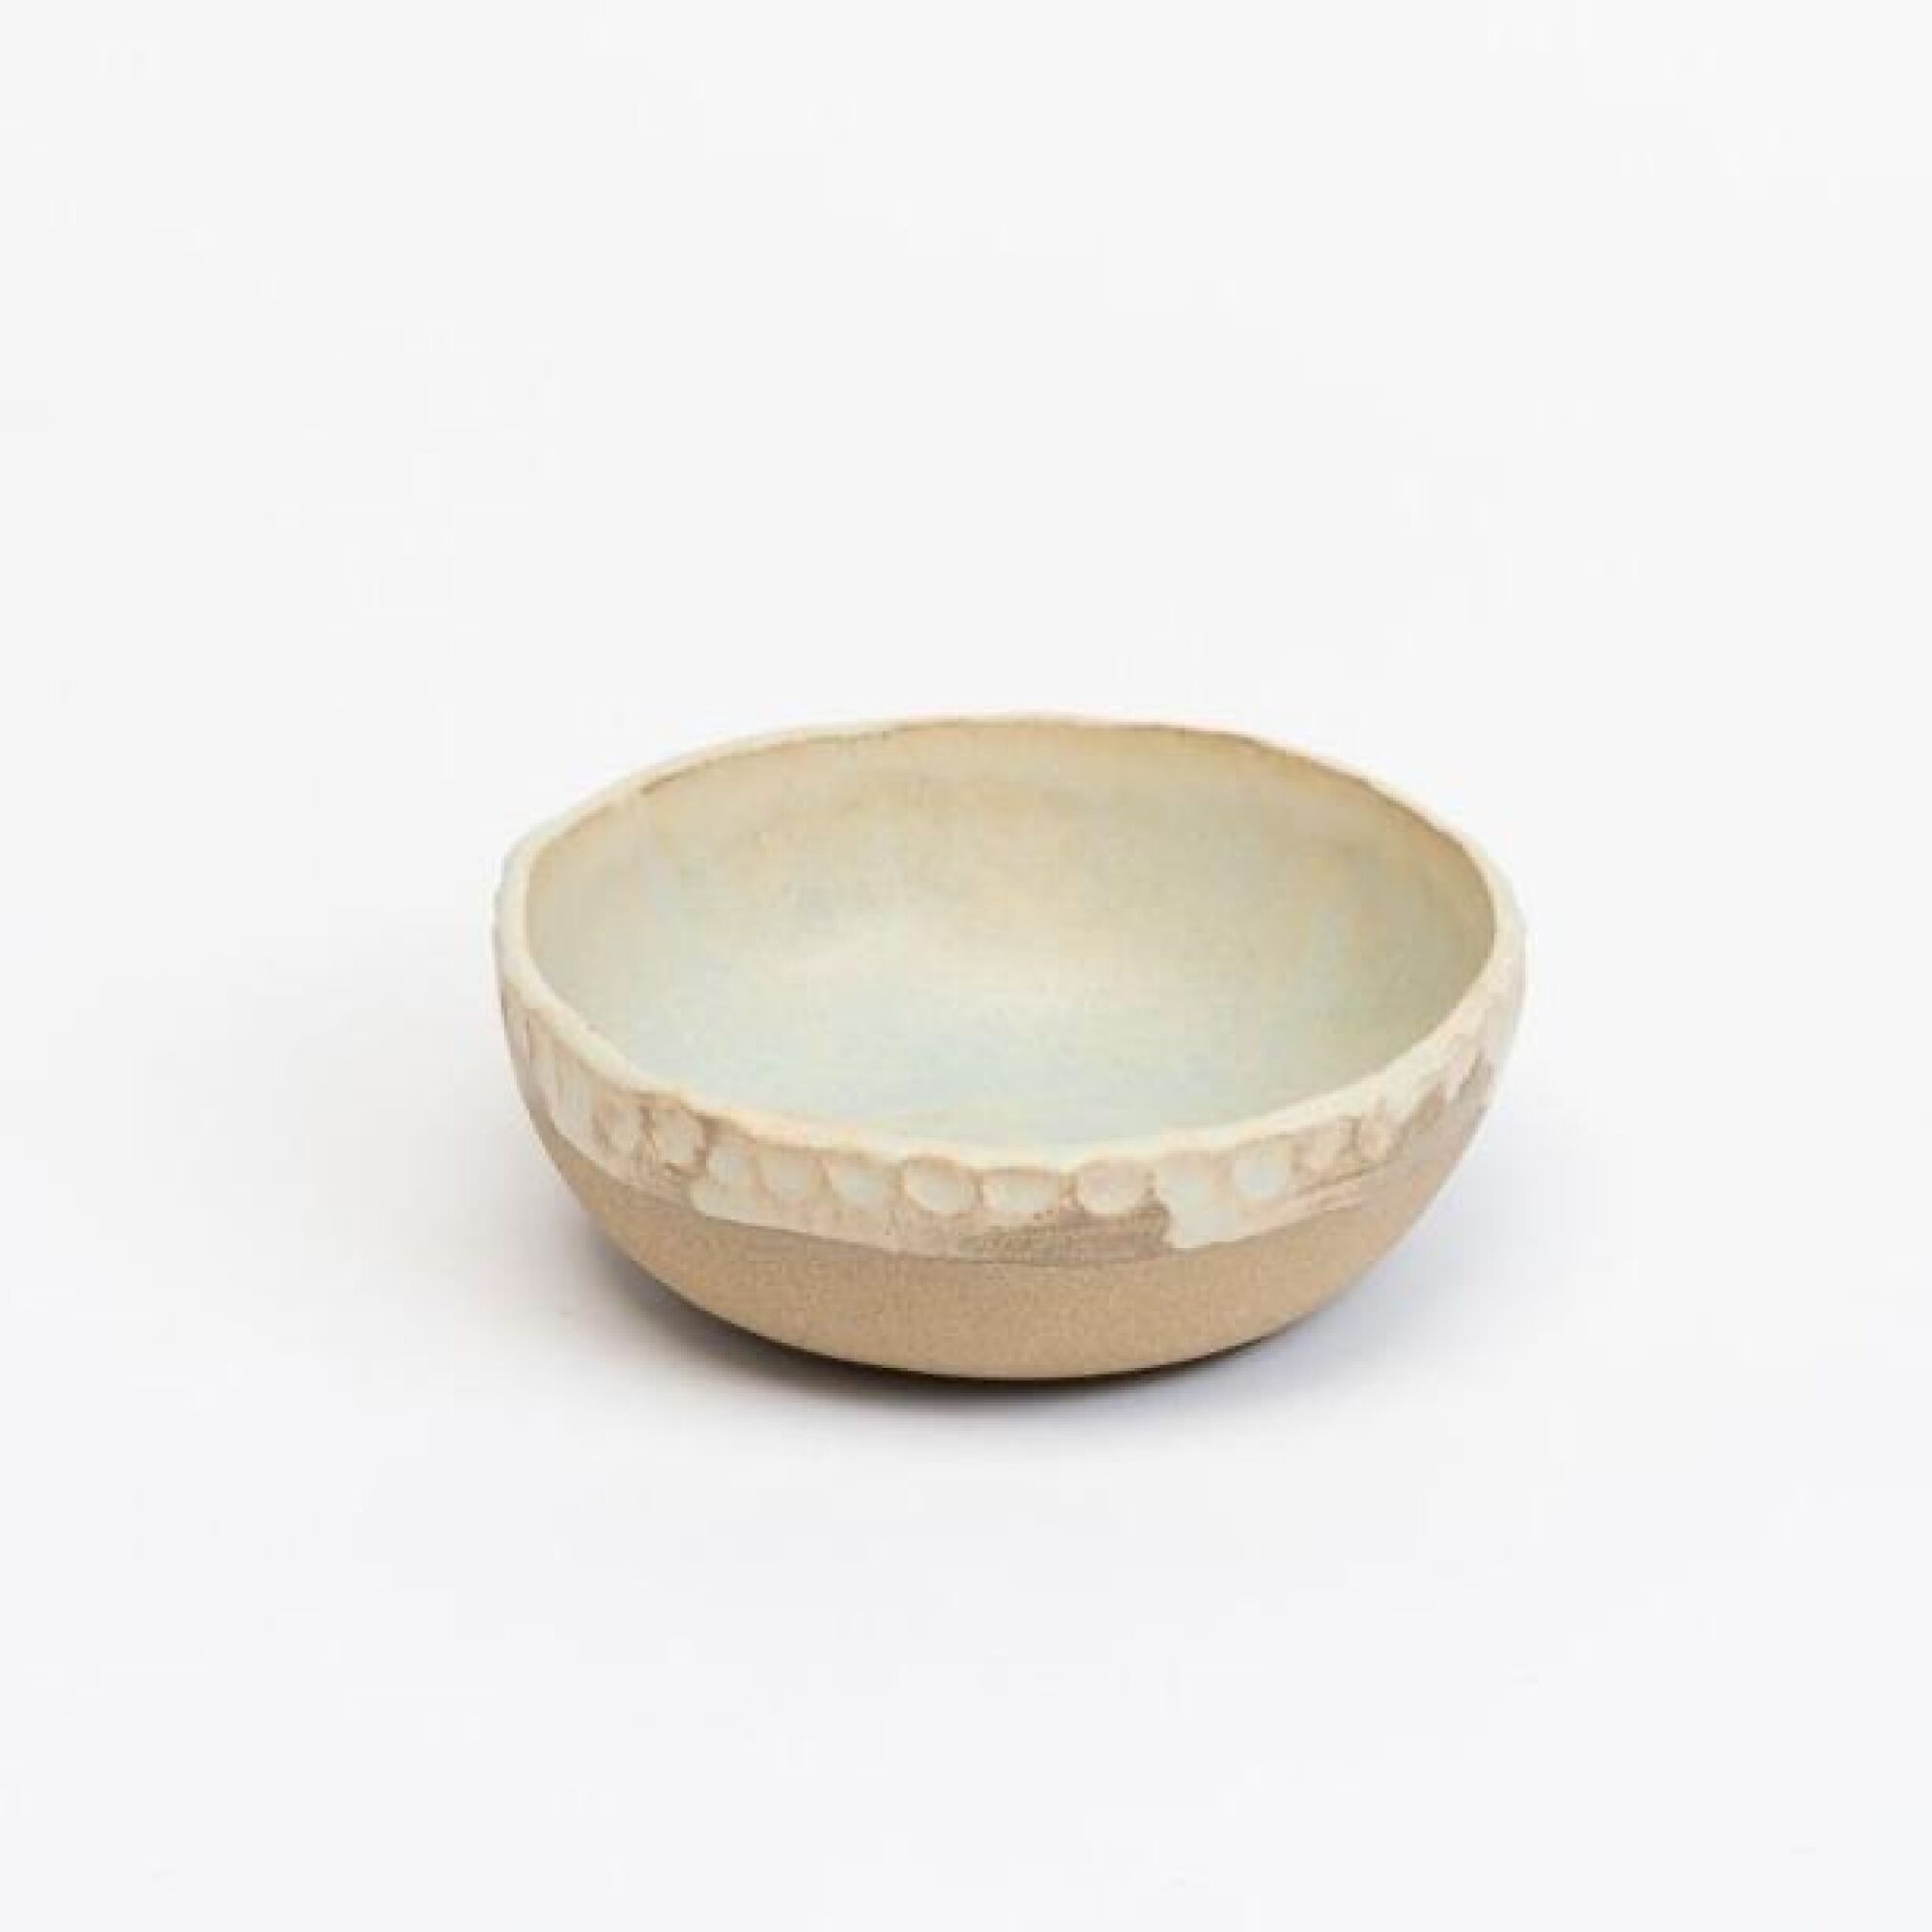 A ceramic bowl with fingerprints indented around its rim